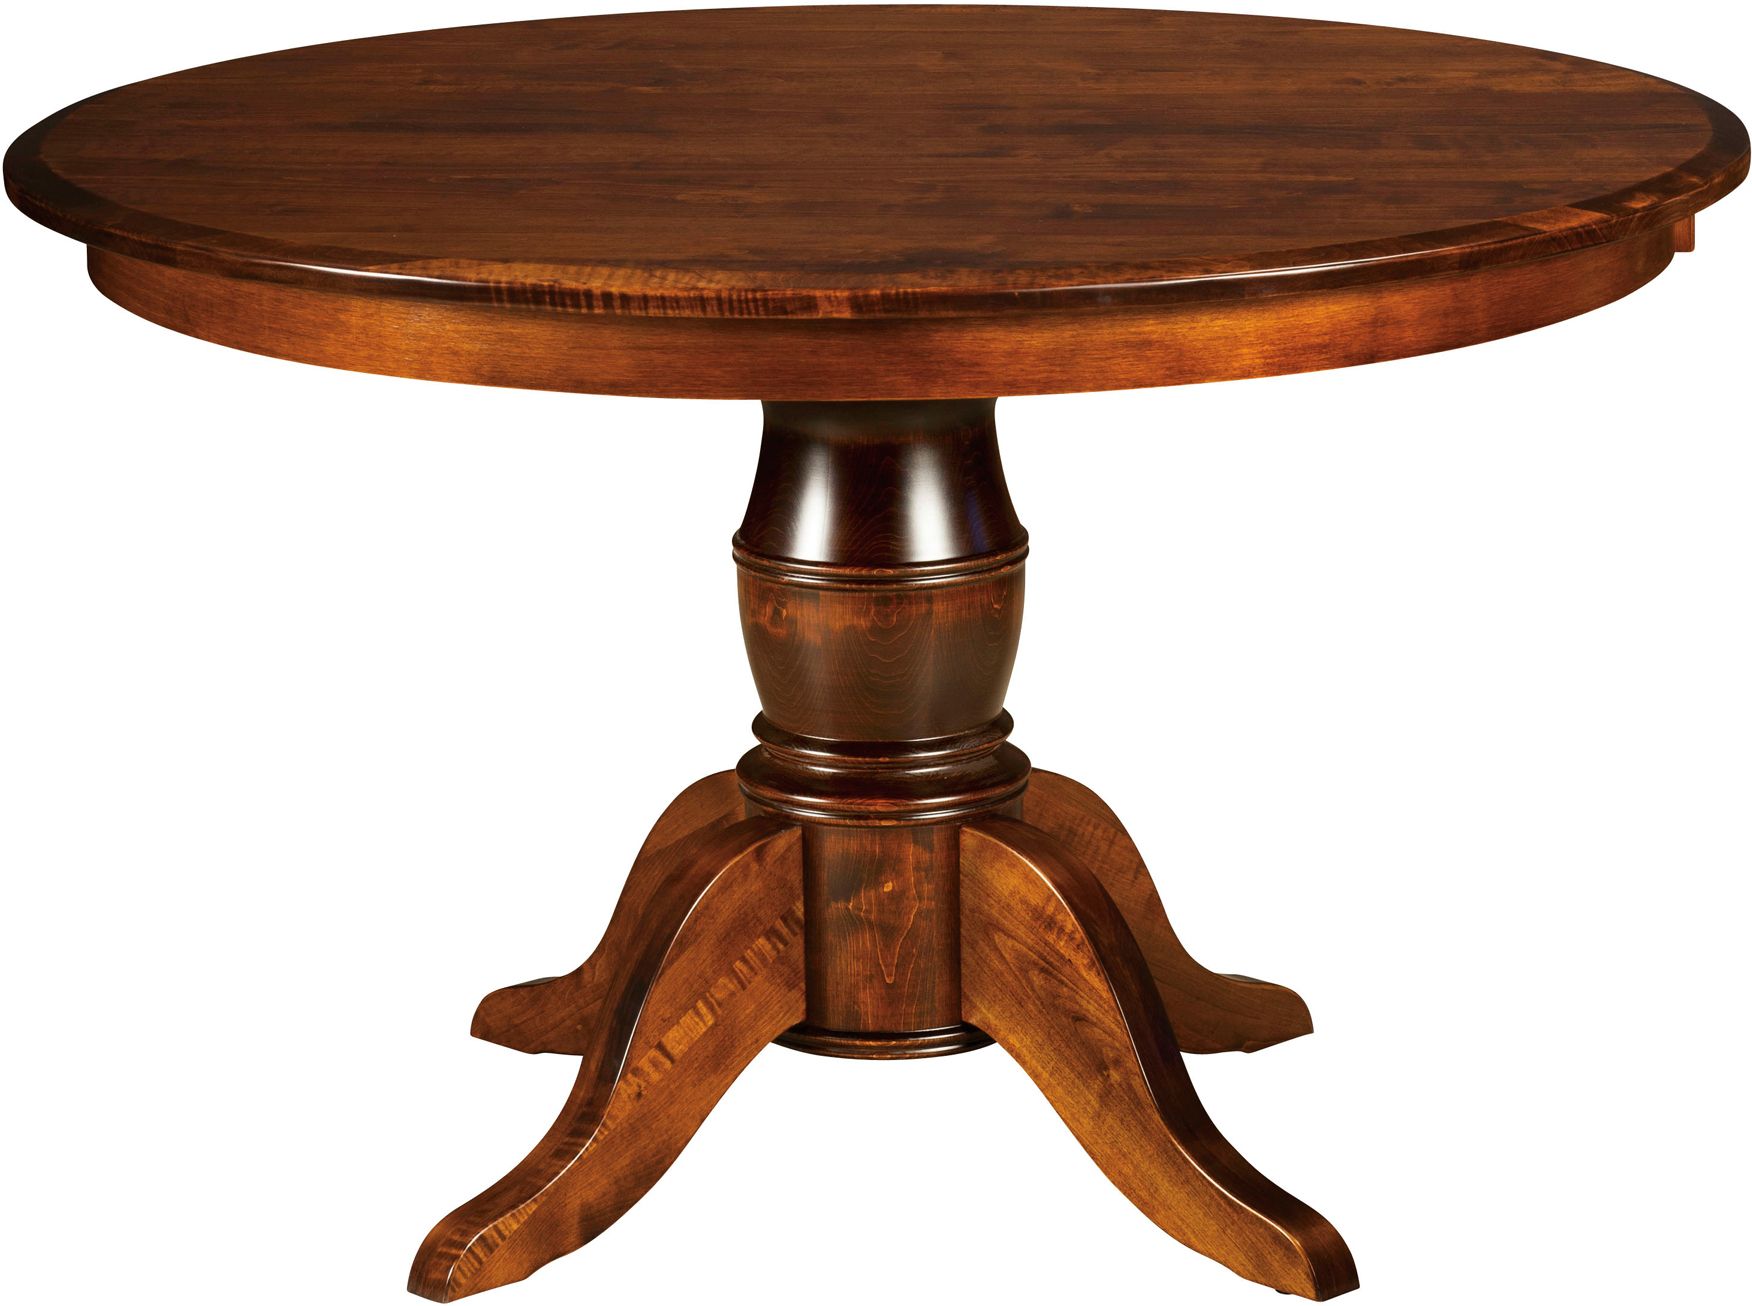 Harrison Single Pedestal Dining Table | Amish Harrison With Most Current Pedestal Dining Tables (View 4 of 15)